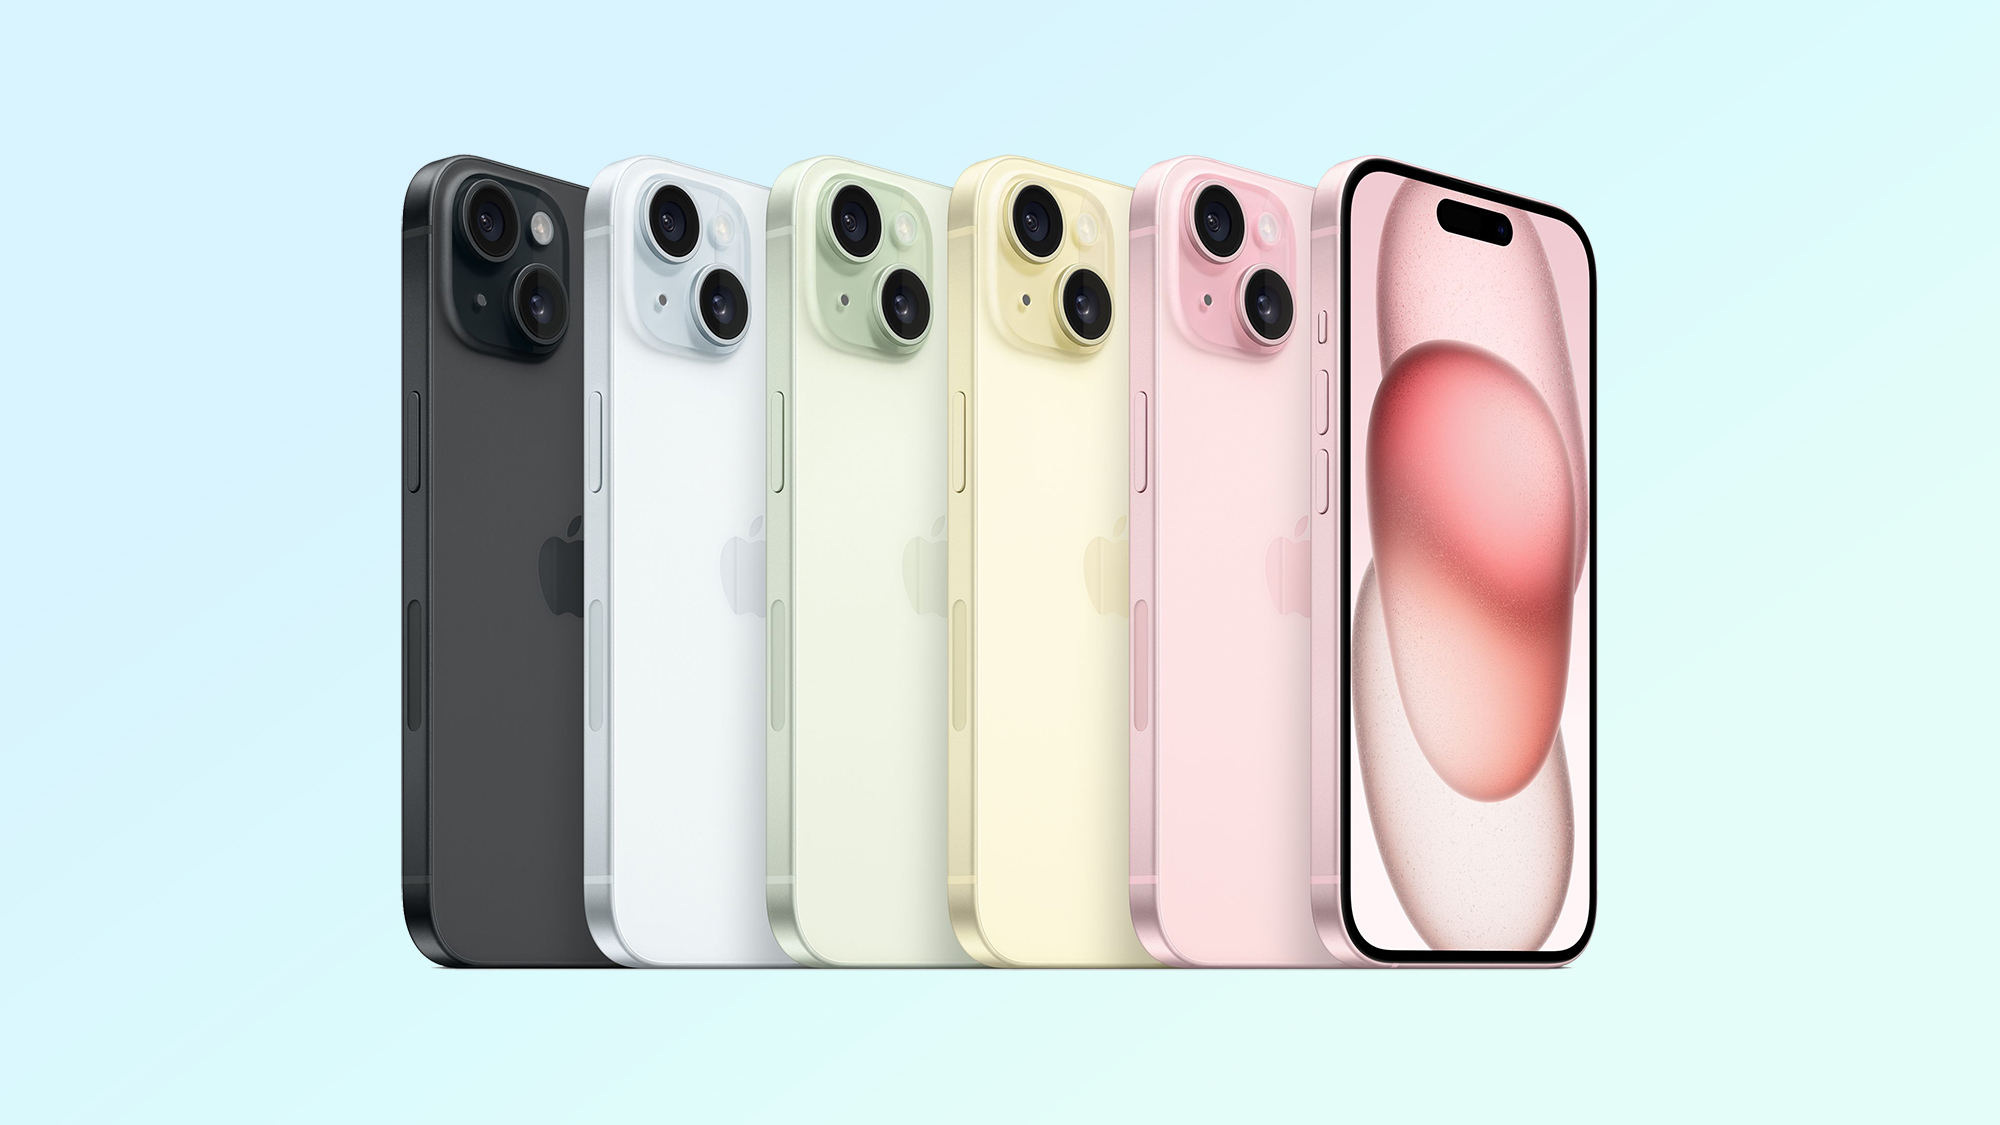 How to Decide Between the 4 Colors of the iPhone 12 Pro